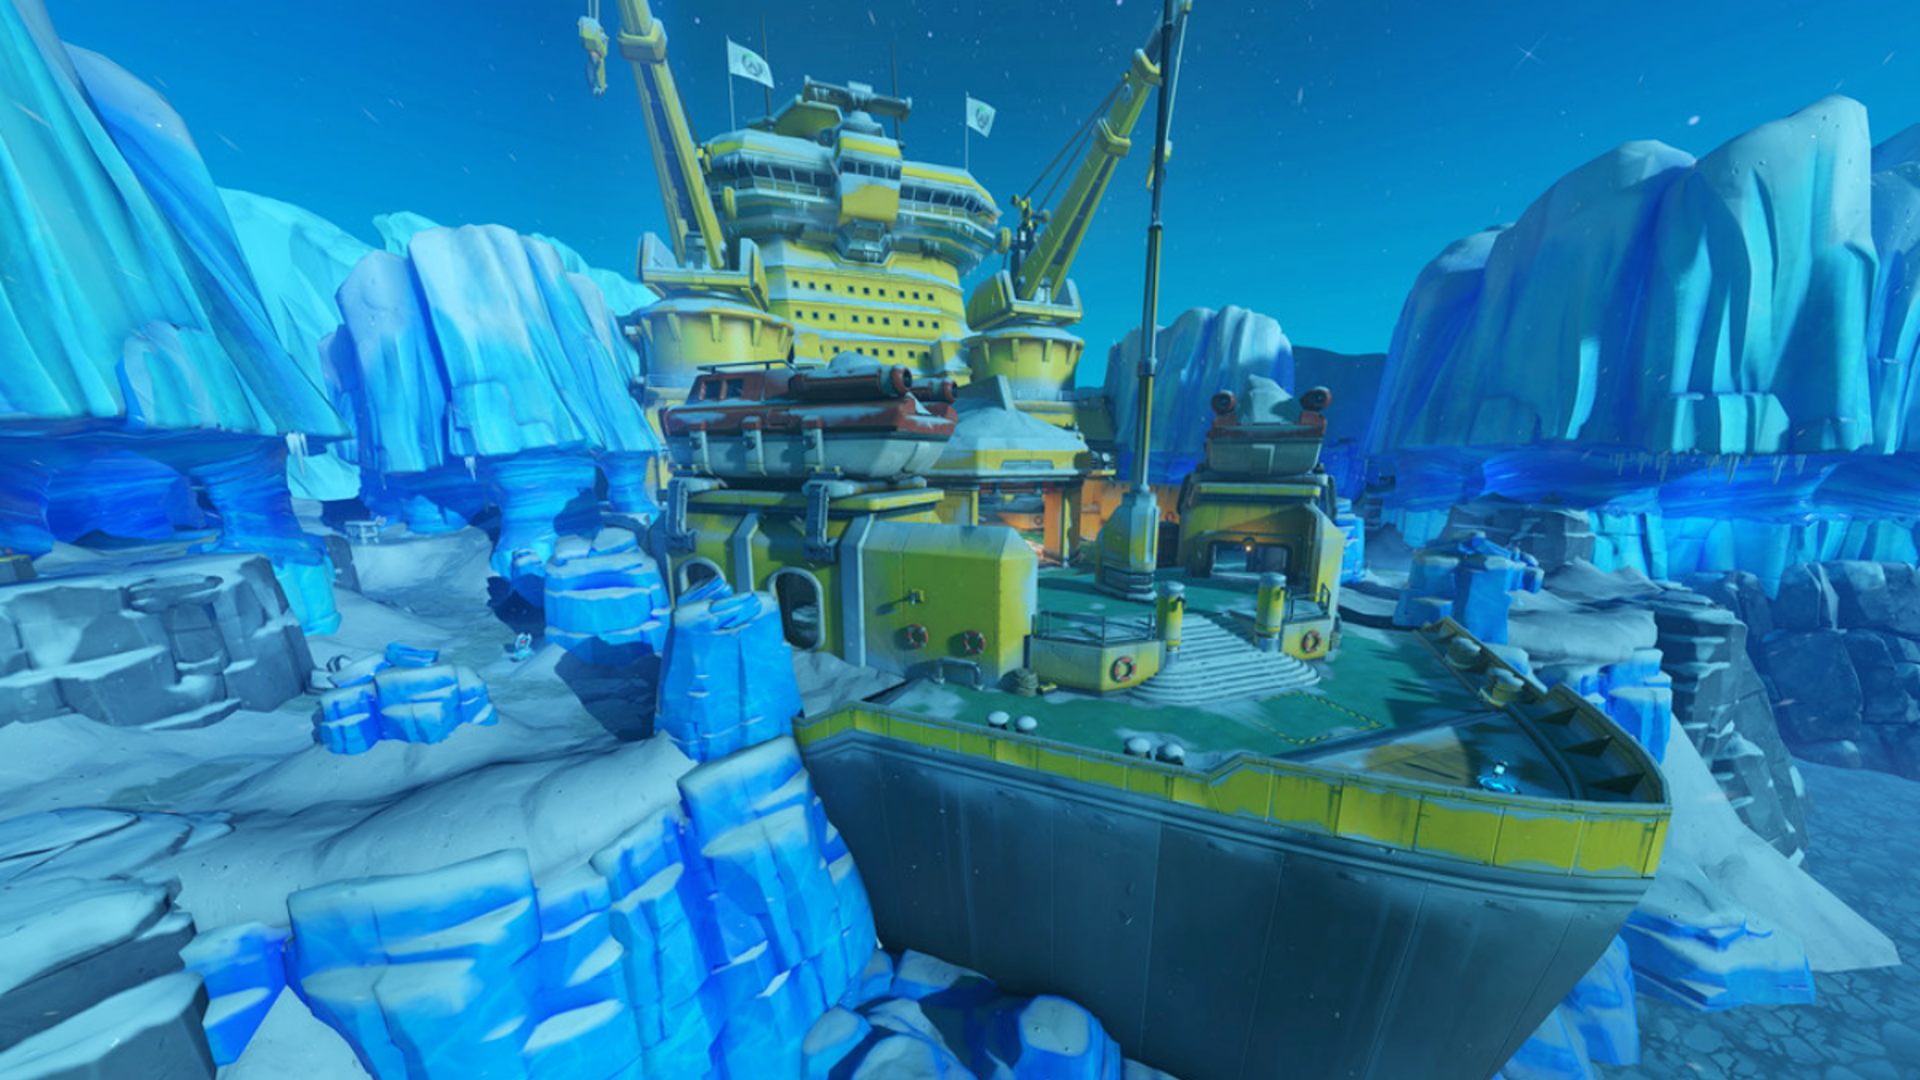 Overwatch 2 season 4 release date: The Antarctic Peninsula, an icy wasteland featuring an icebreaker ship, that debuted in the hero shooter for season 3.